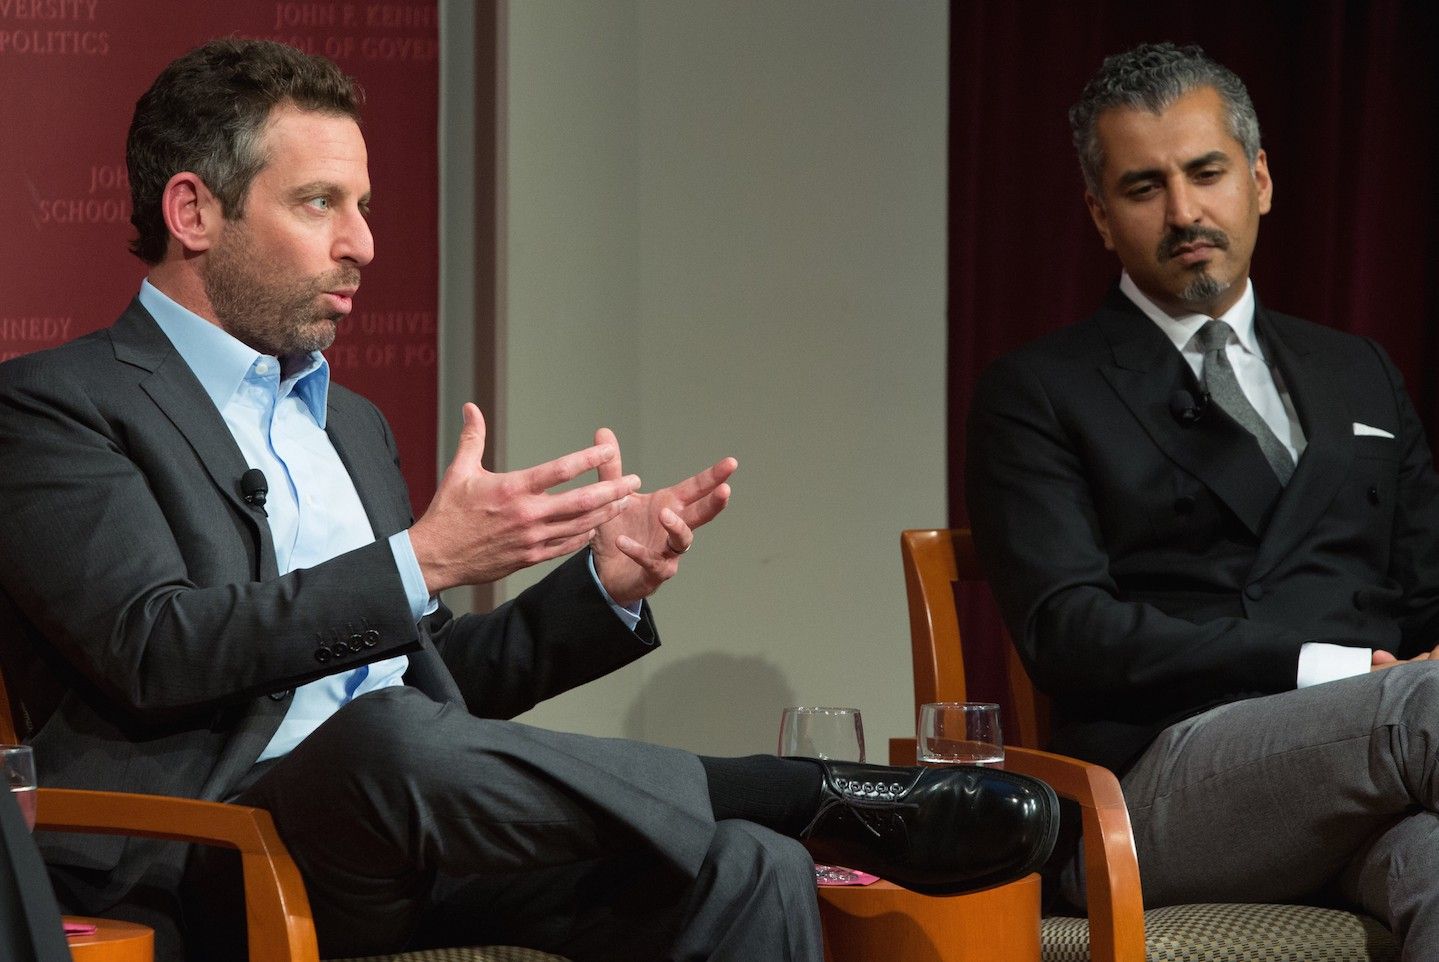 The Quilliam Foundation is financed by Tea-Party conservatives investigated by Sam Harris